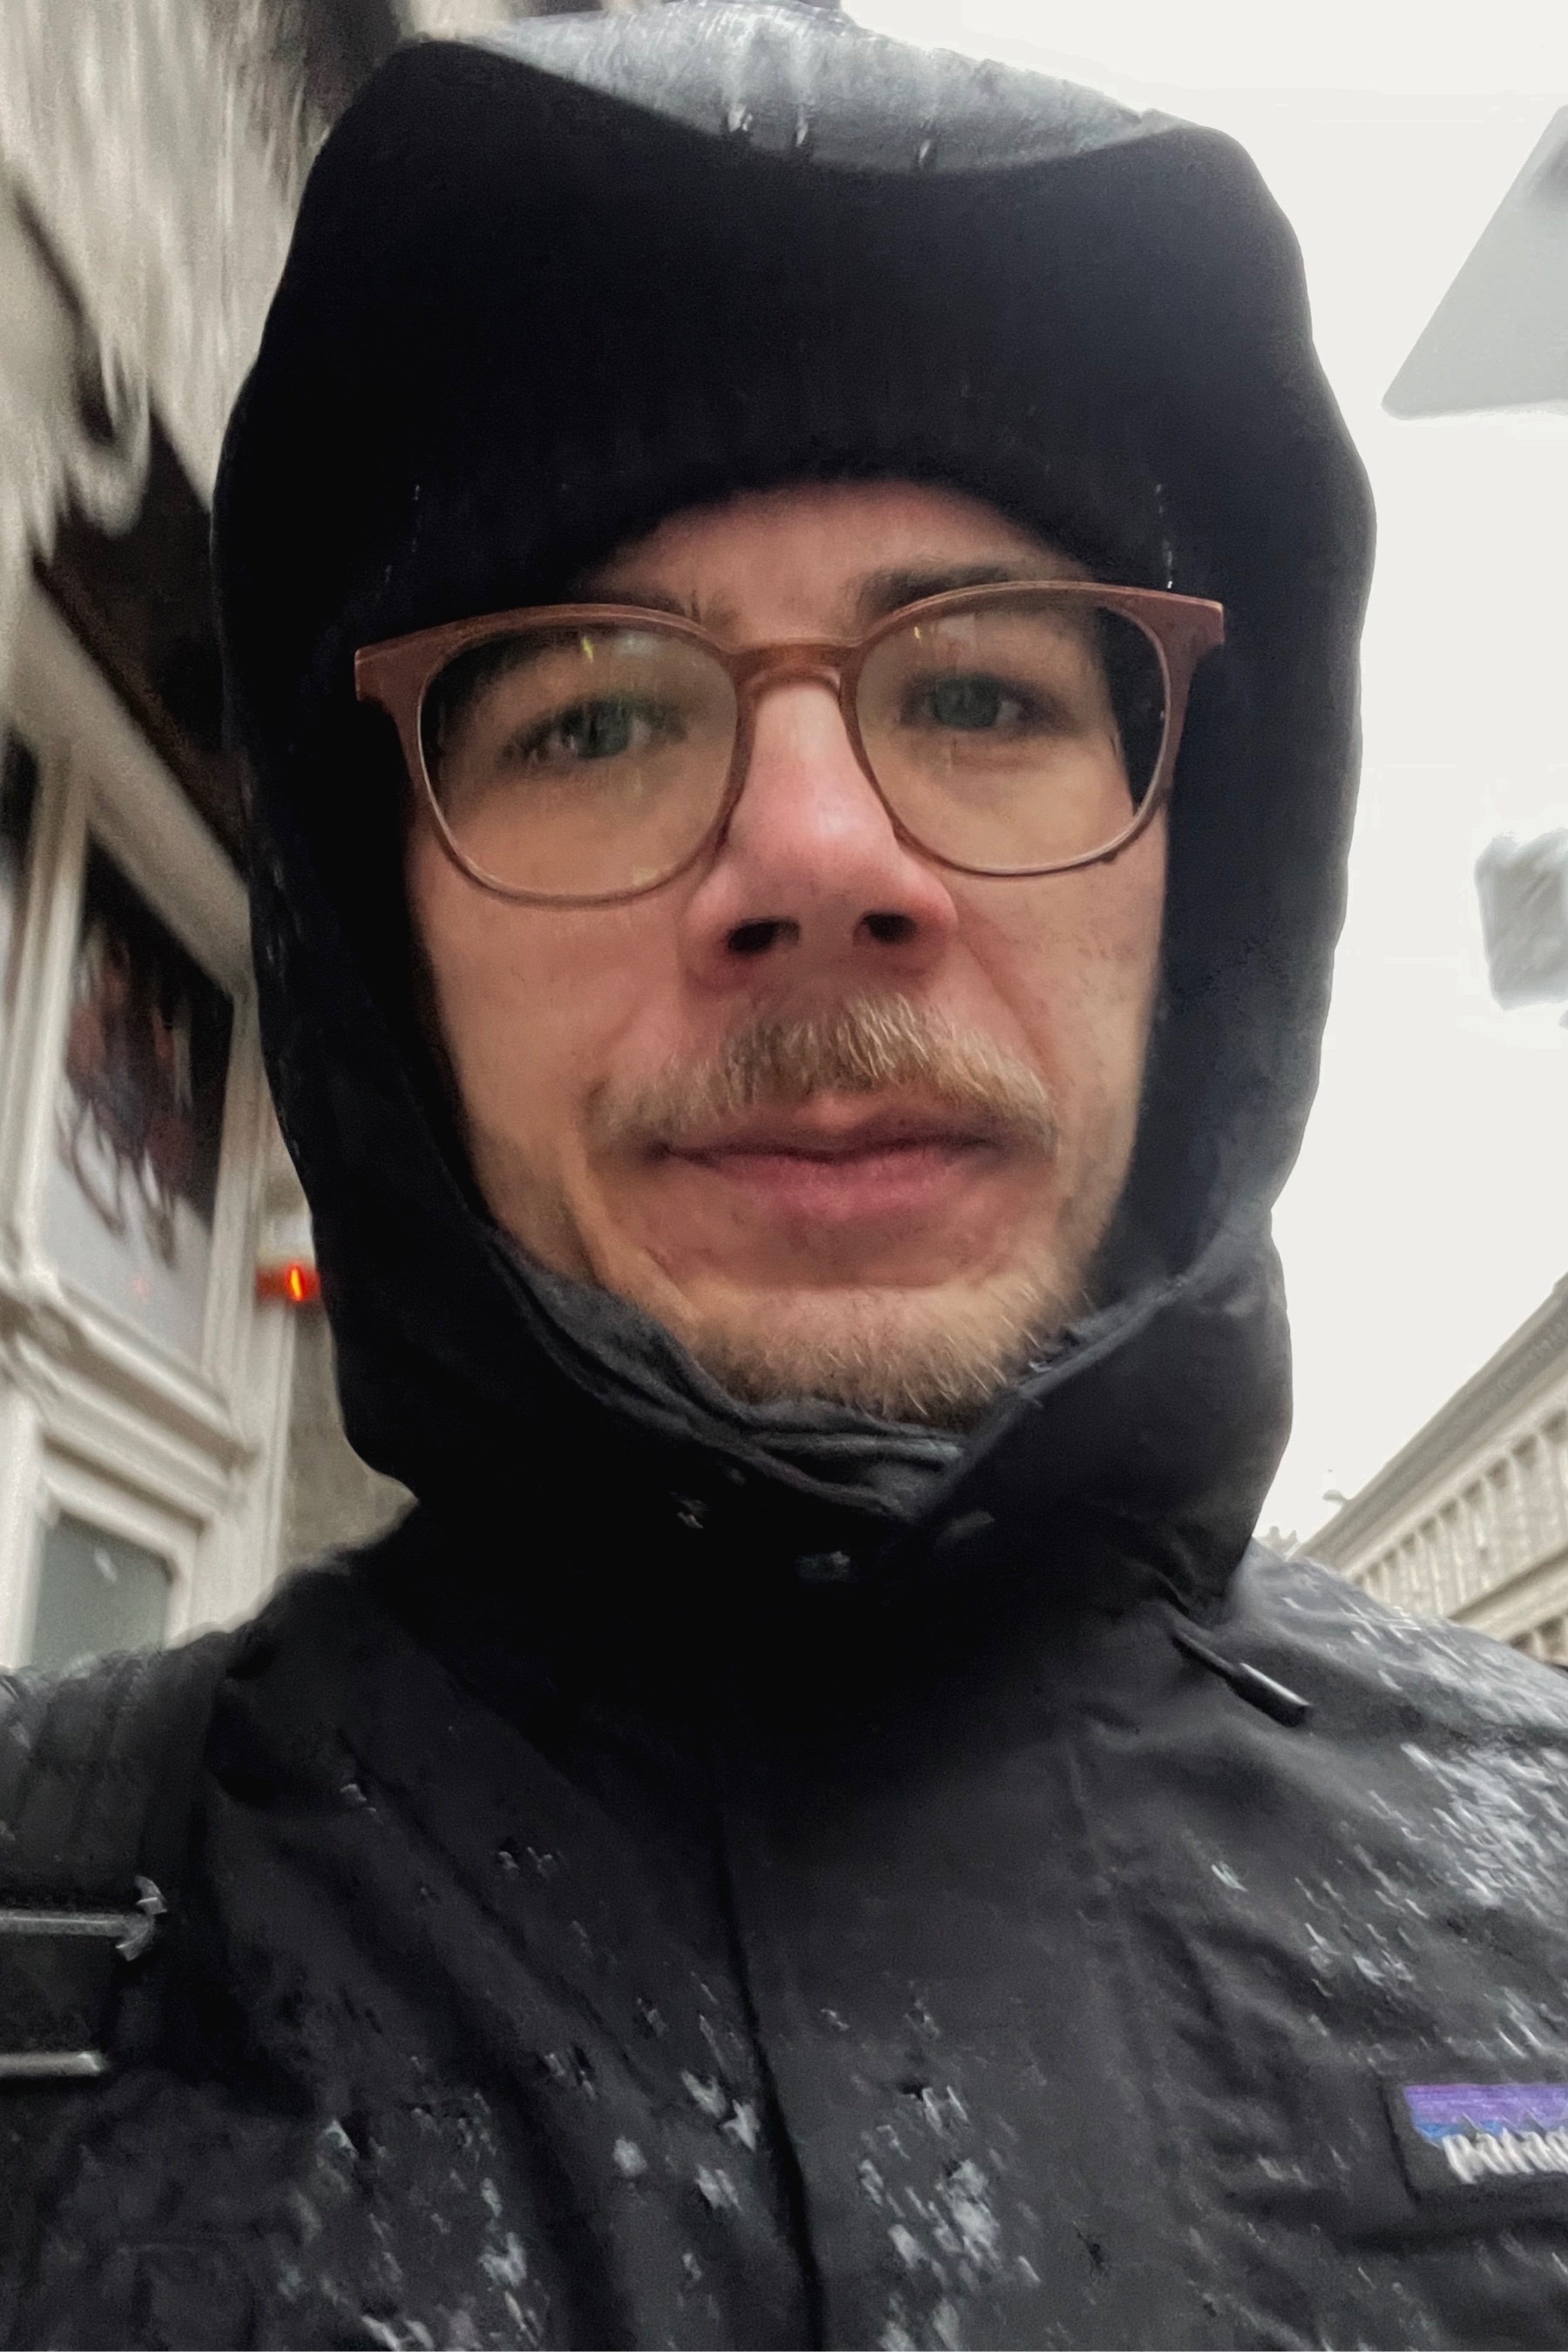 Selfie of a man walking in the rain, wearing a black wool hat and a black coat with a hood. there are drops on his glasses and he looks very wet.